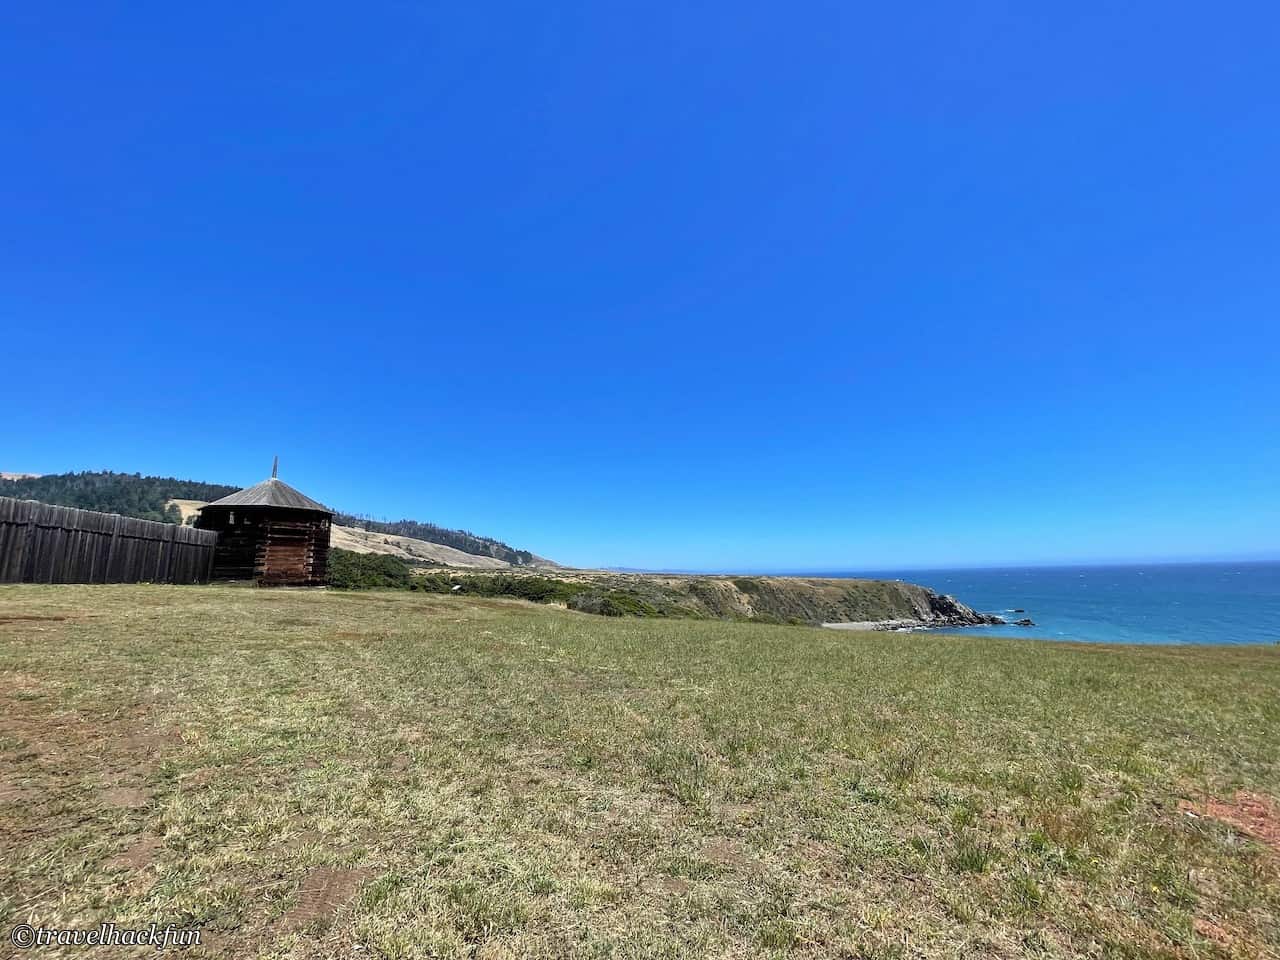 Fort Ross,俄羅斯堡,fort ross state park,fort ross state historic park,fort ross california 39